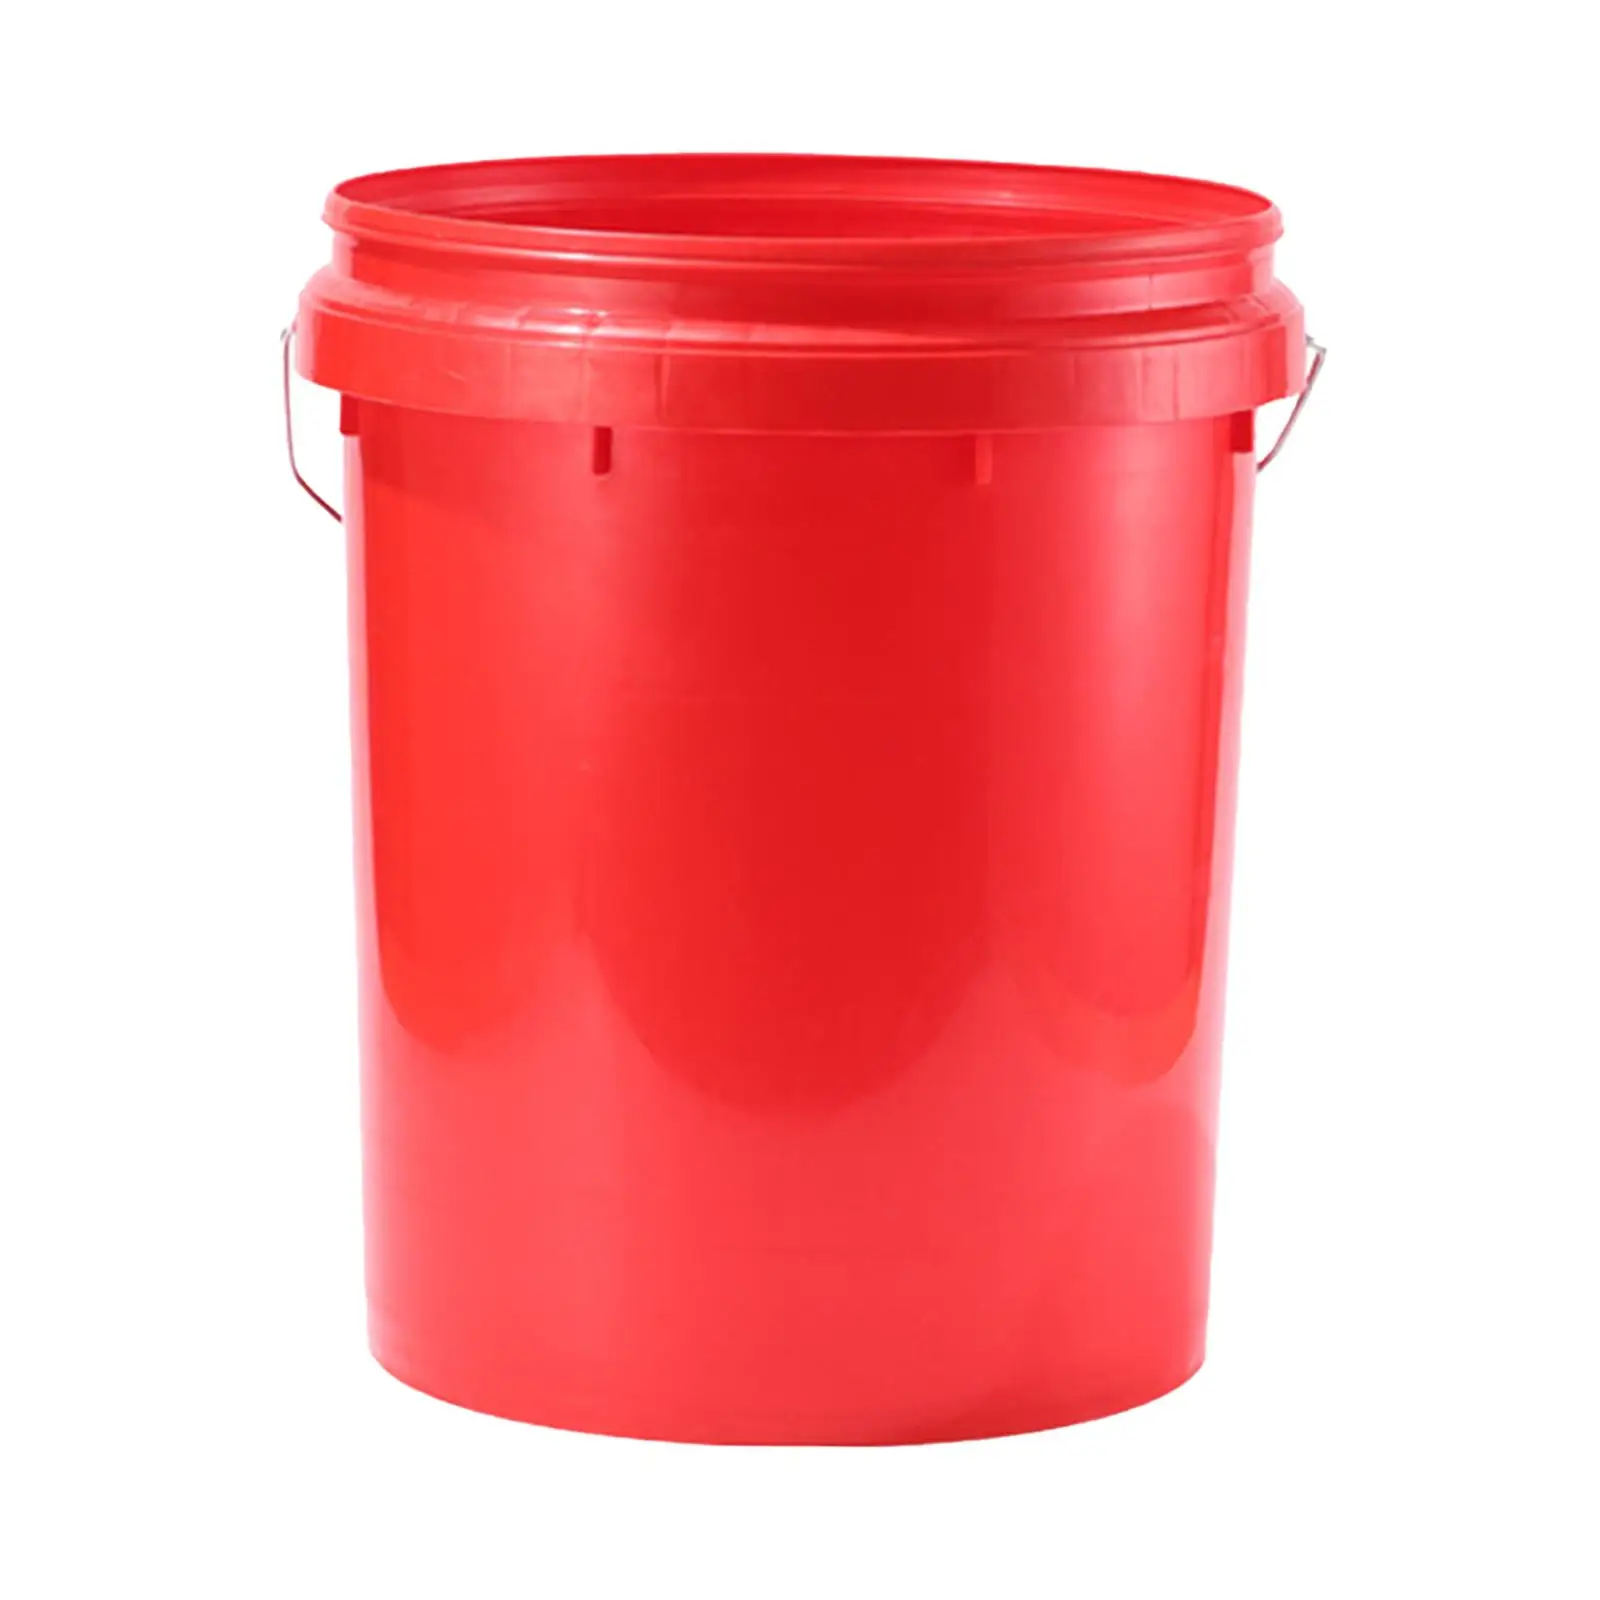 Car Washing Accessories Rolling Bucket Dolly for Painting Assistance